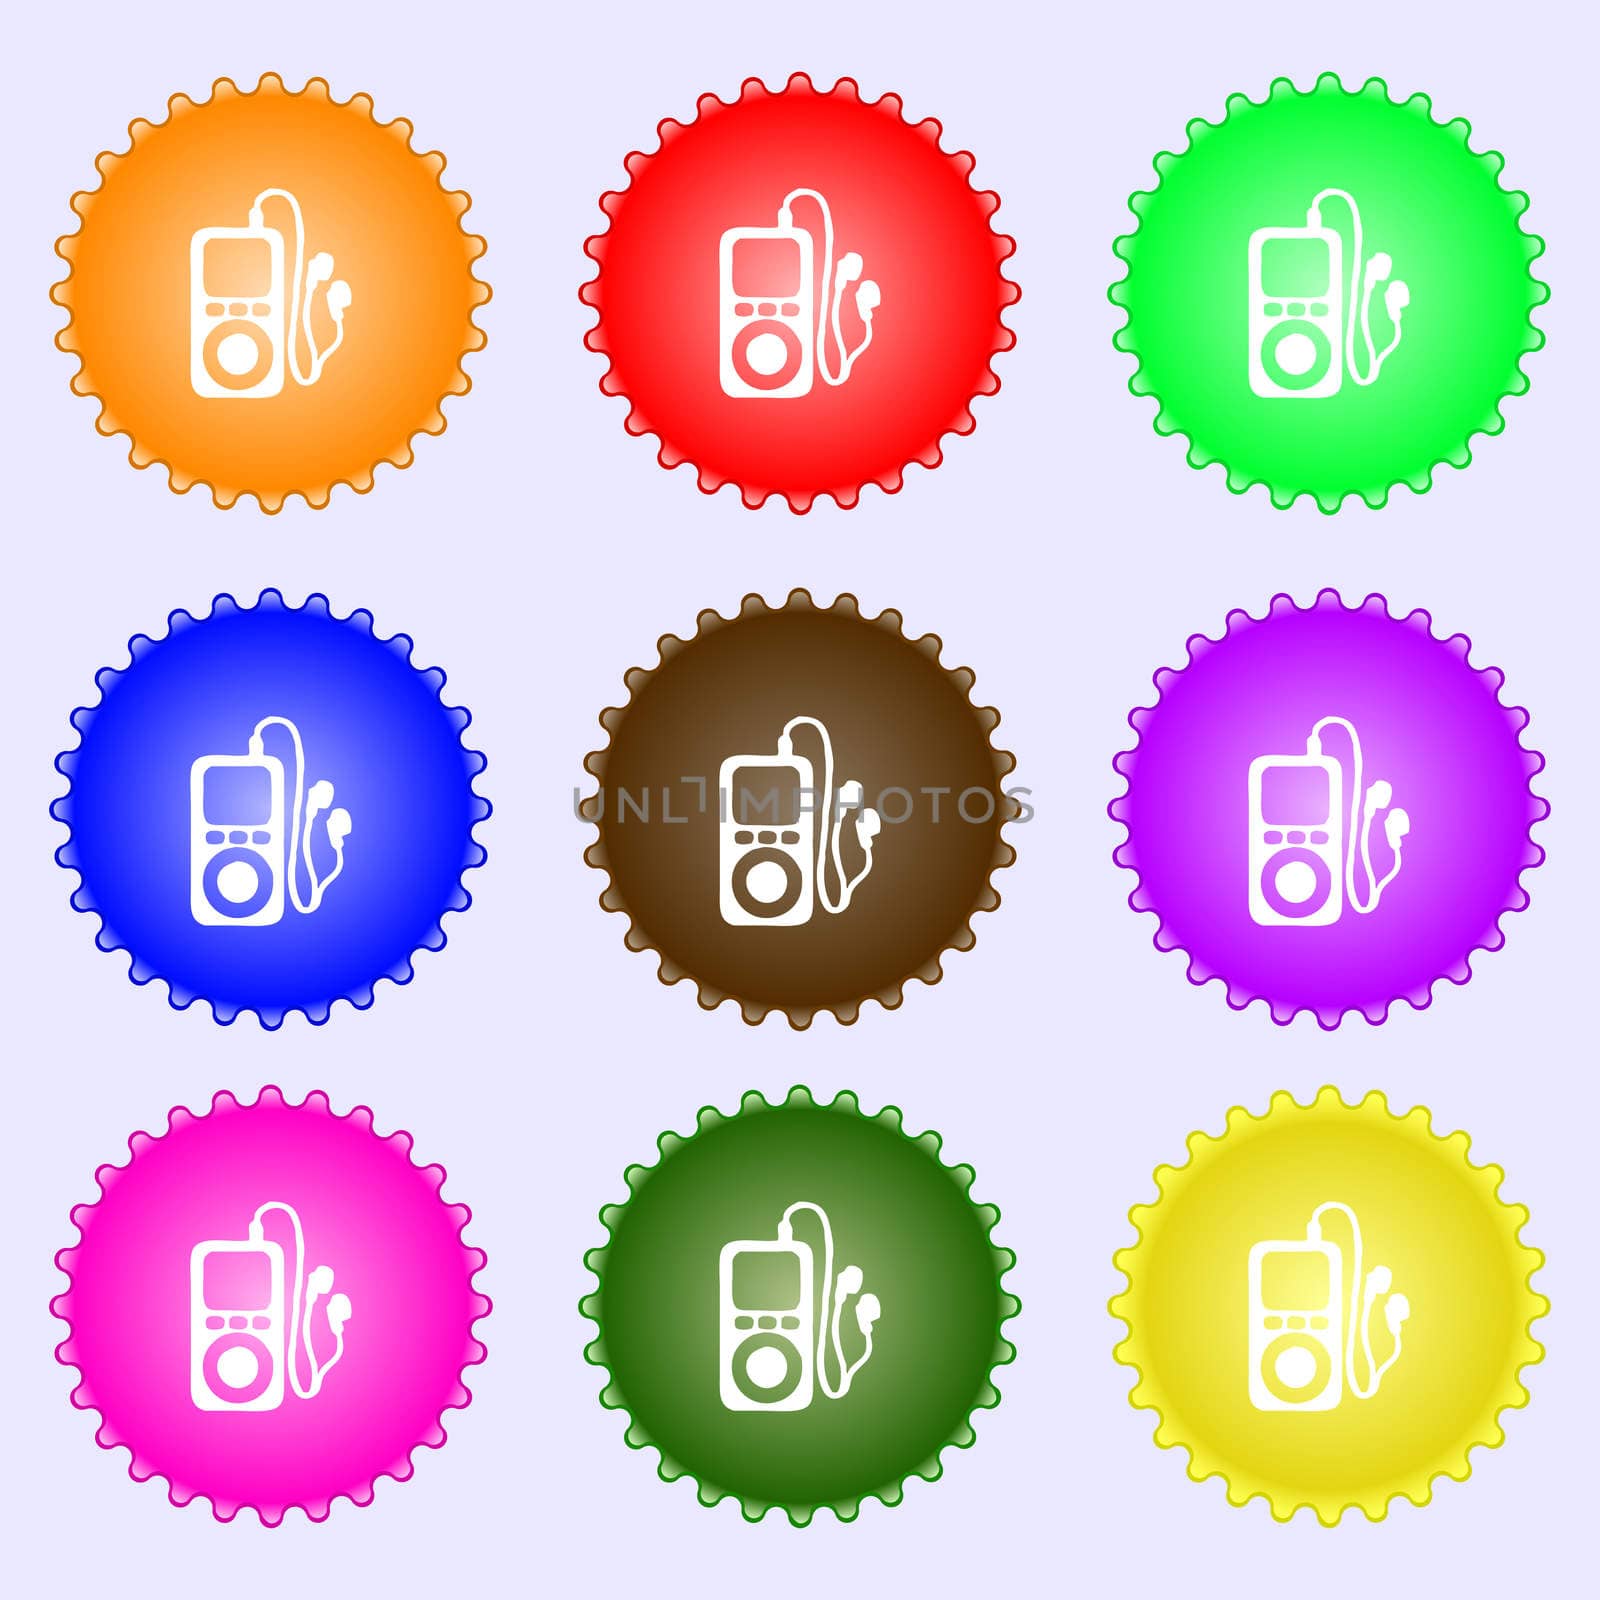 MP3 player, headphones, music icon sign. A set of nine different colored labels.  by serhii_lohvyniuk